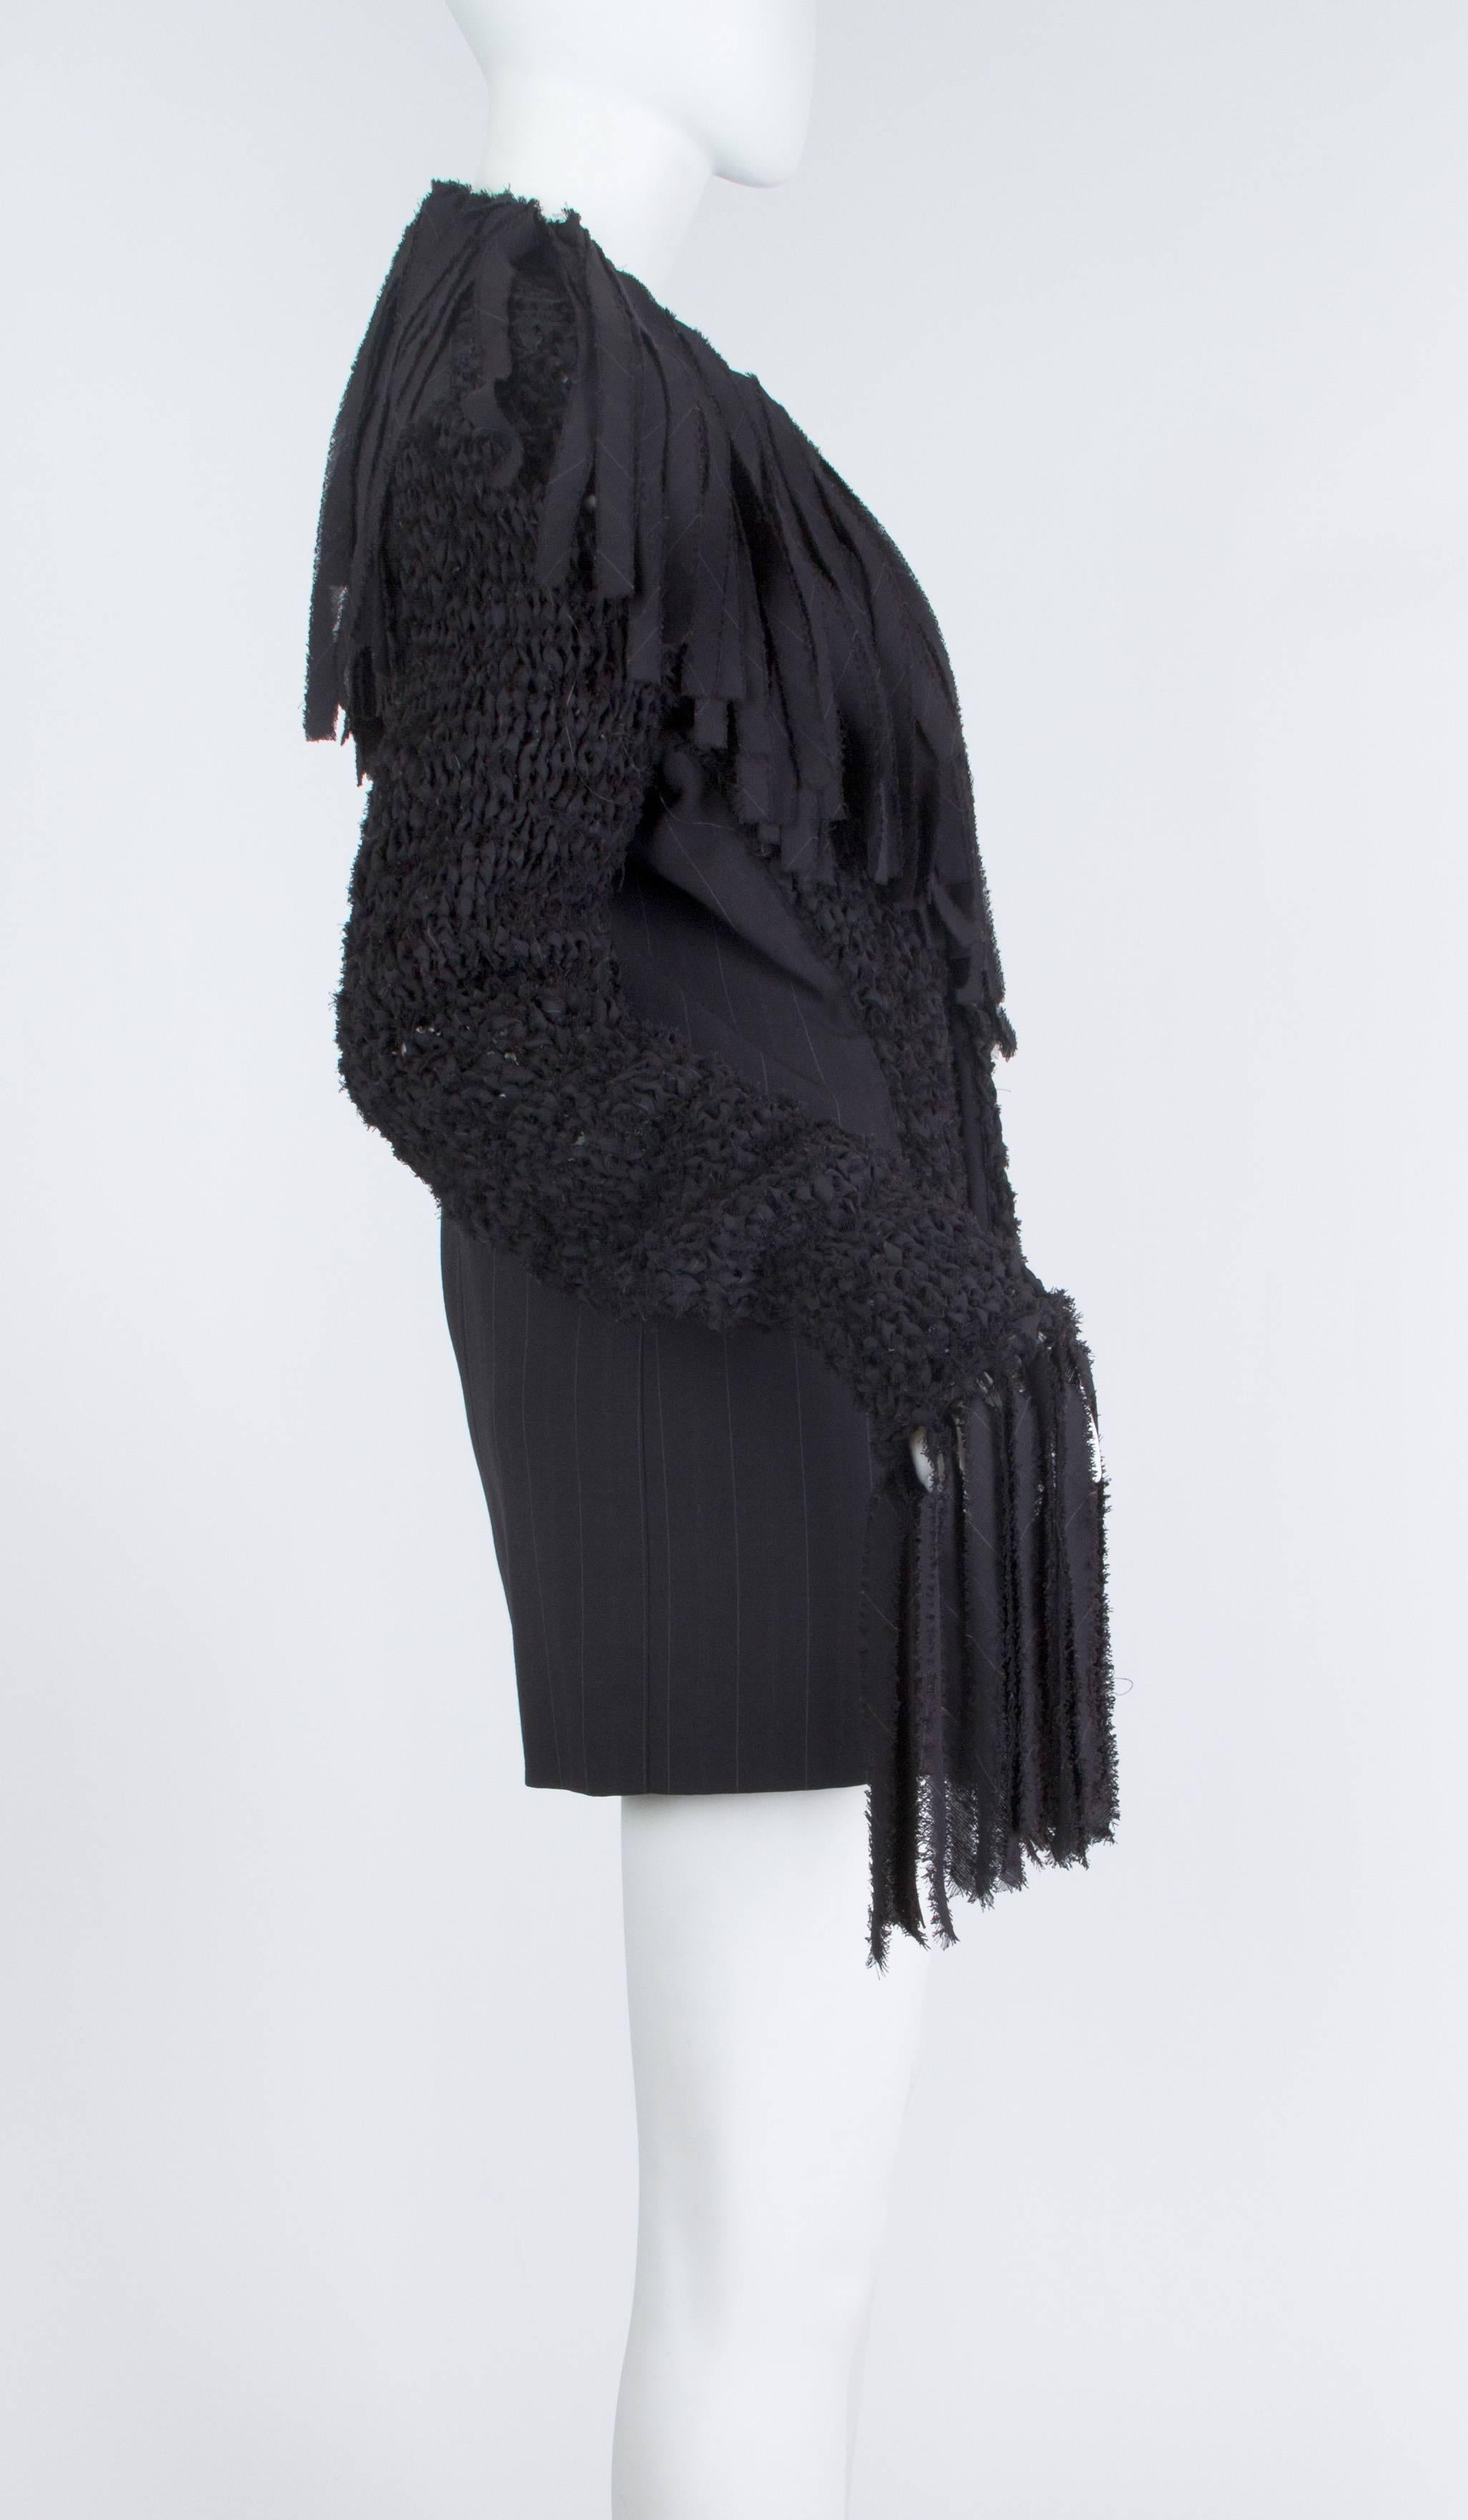 Black Jean Paul Gaultier Deconstructed and Knit Blazer